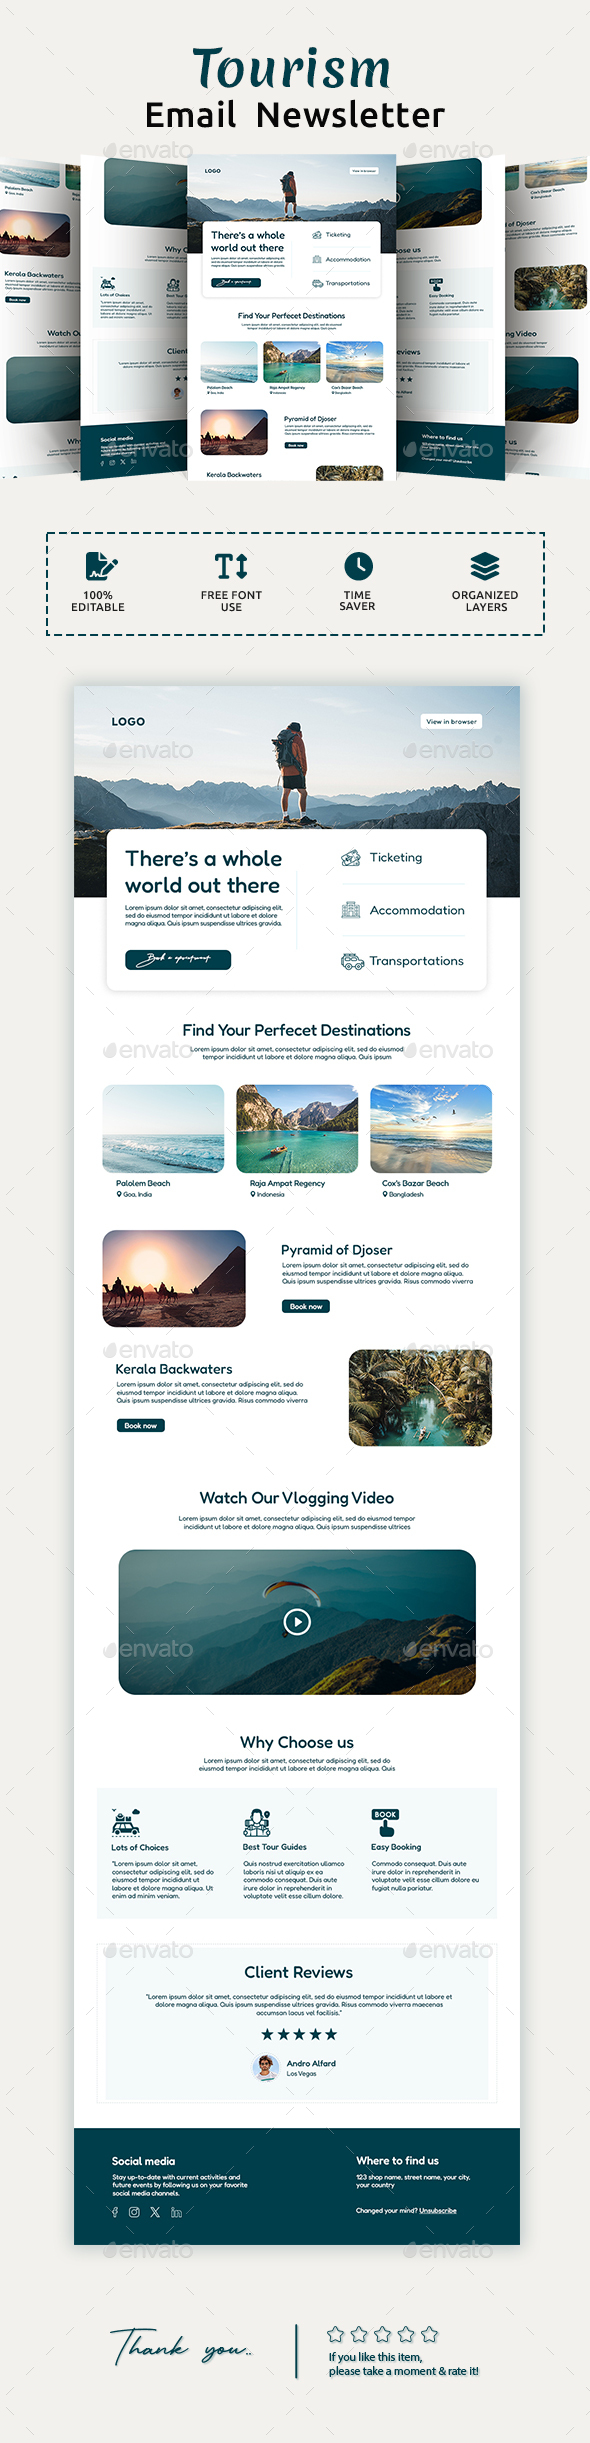 [DOWNLOAD]Travel Agency Email Newsletter PSD Template